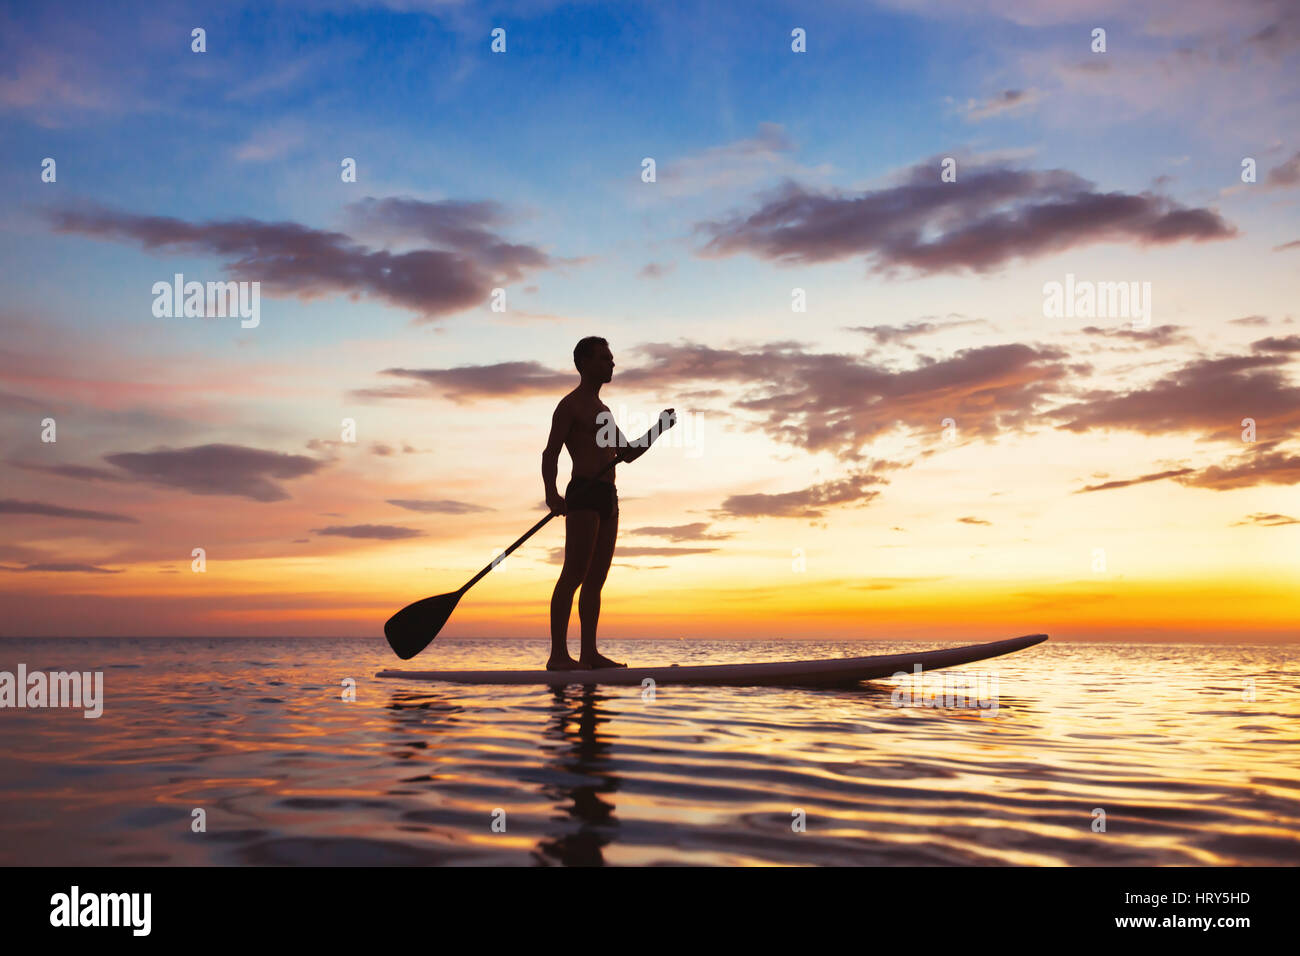 paddle standing board, beach leisure activity, beautiful silhouette of man at sunset Stock Photo